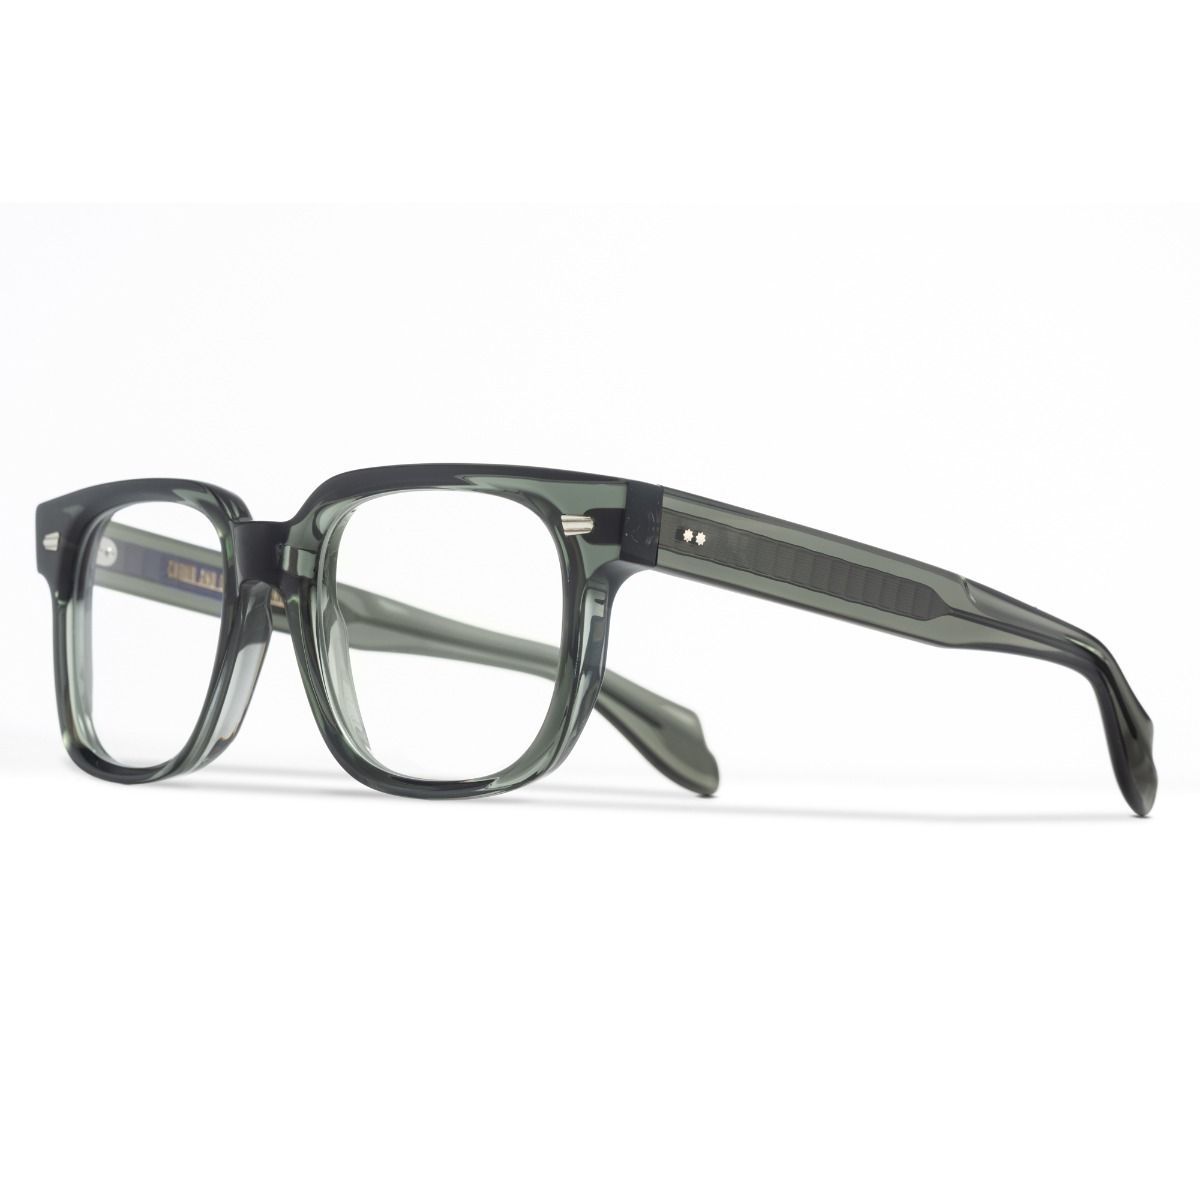 1399 Optical Square Glasses - 04 Aviator Blue by Cutler and Gross